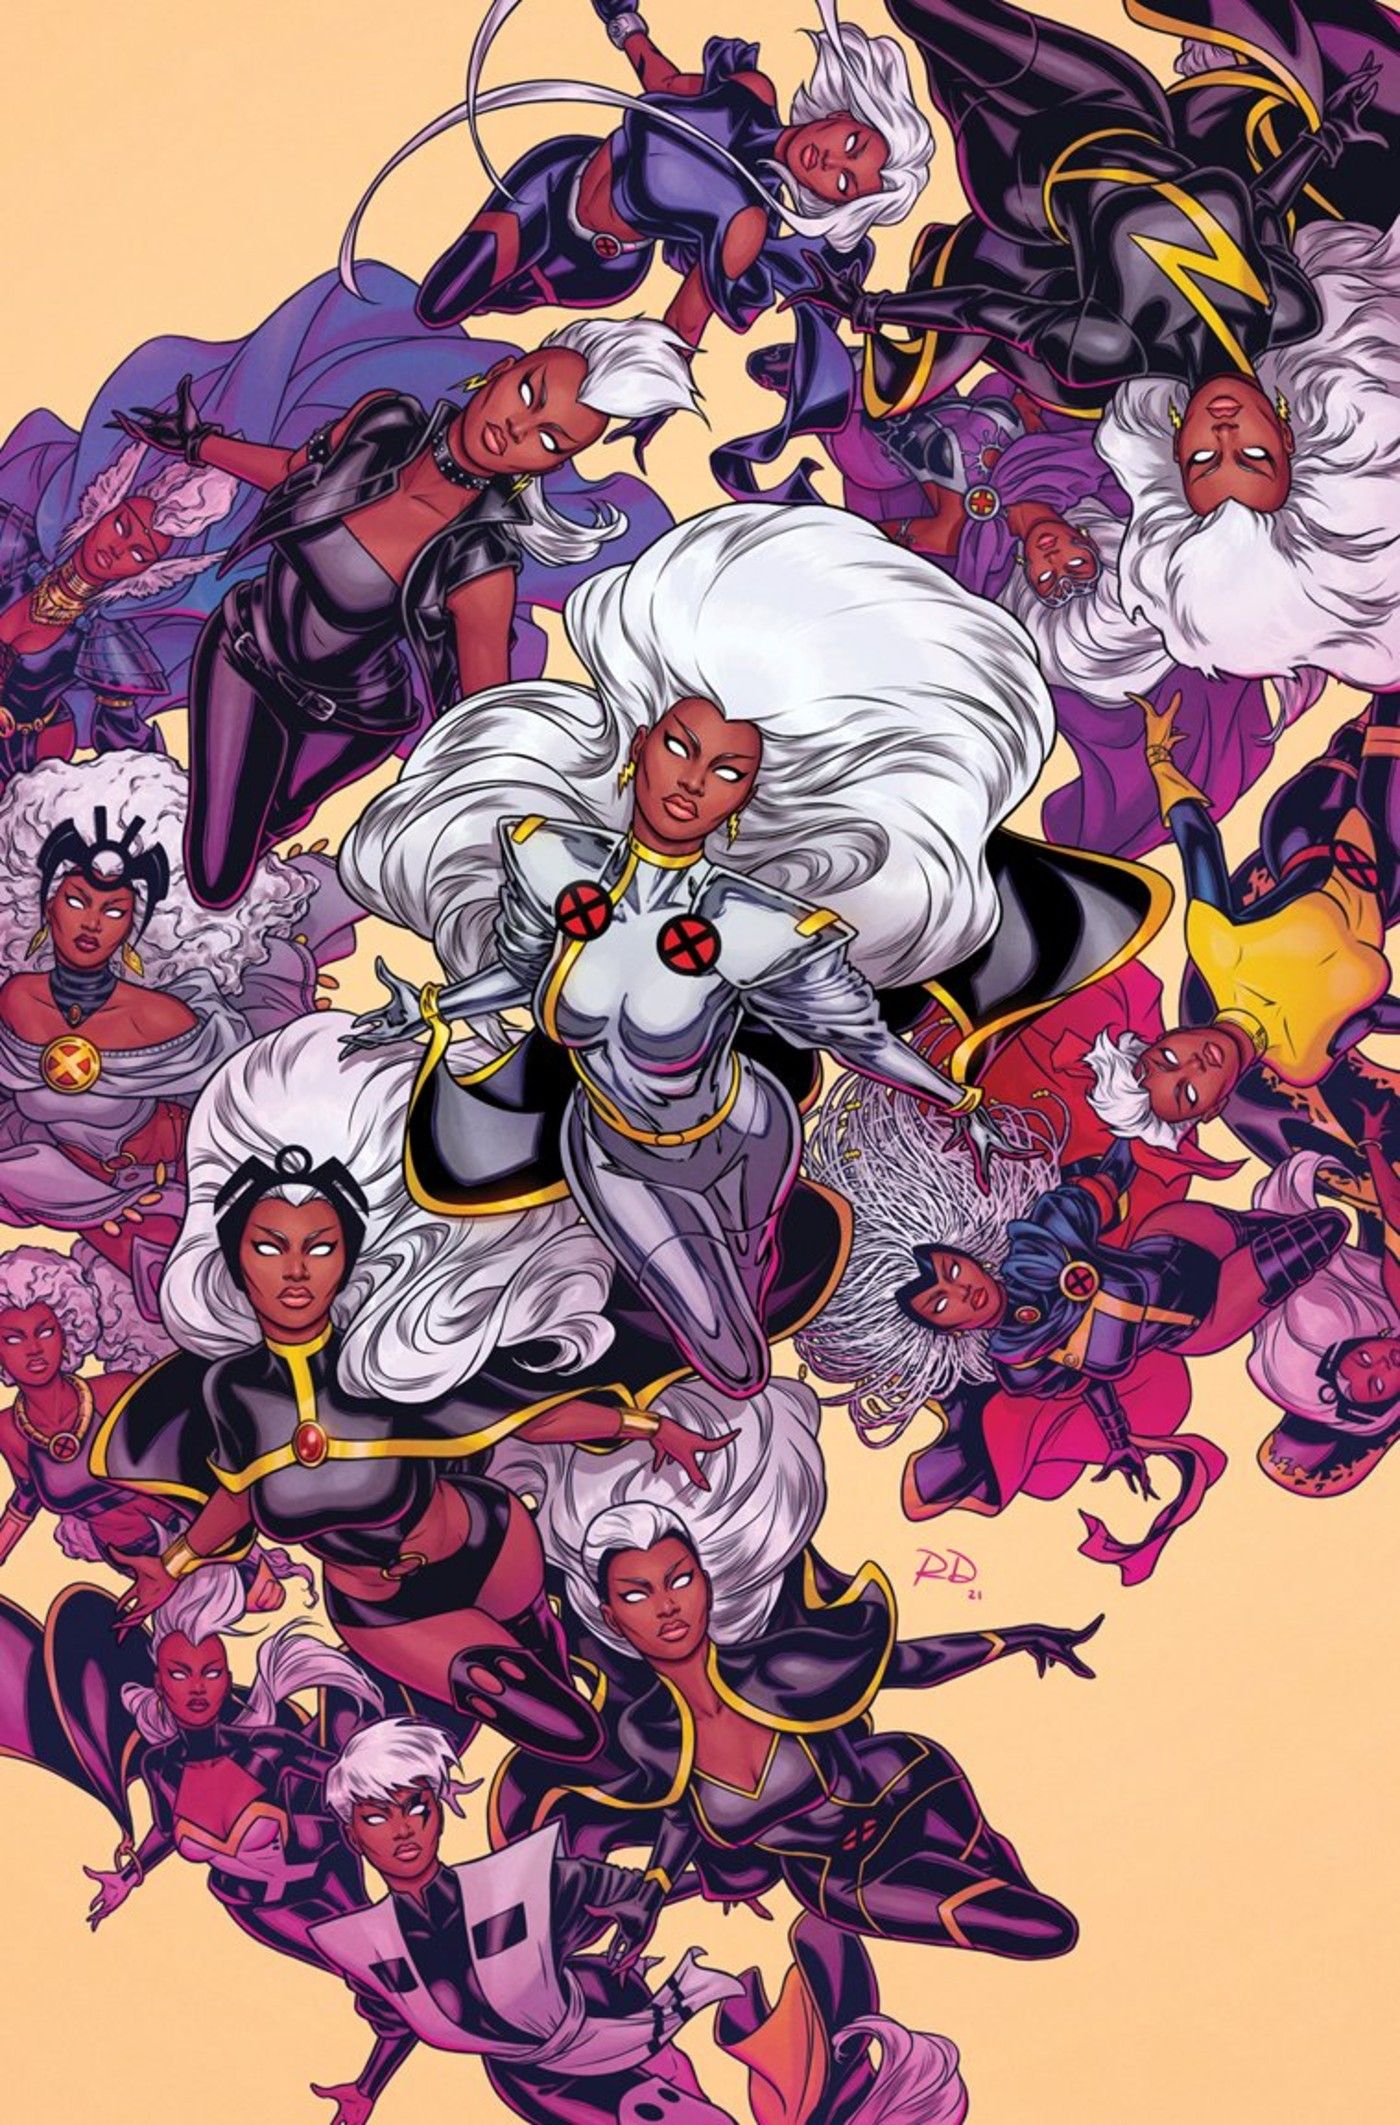 Stunning X Men Variant Cover Showcases Storms Marvel Comics Costumes 